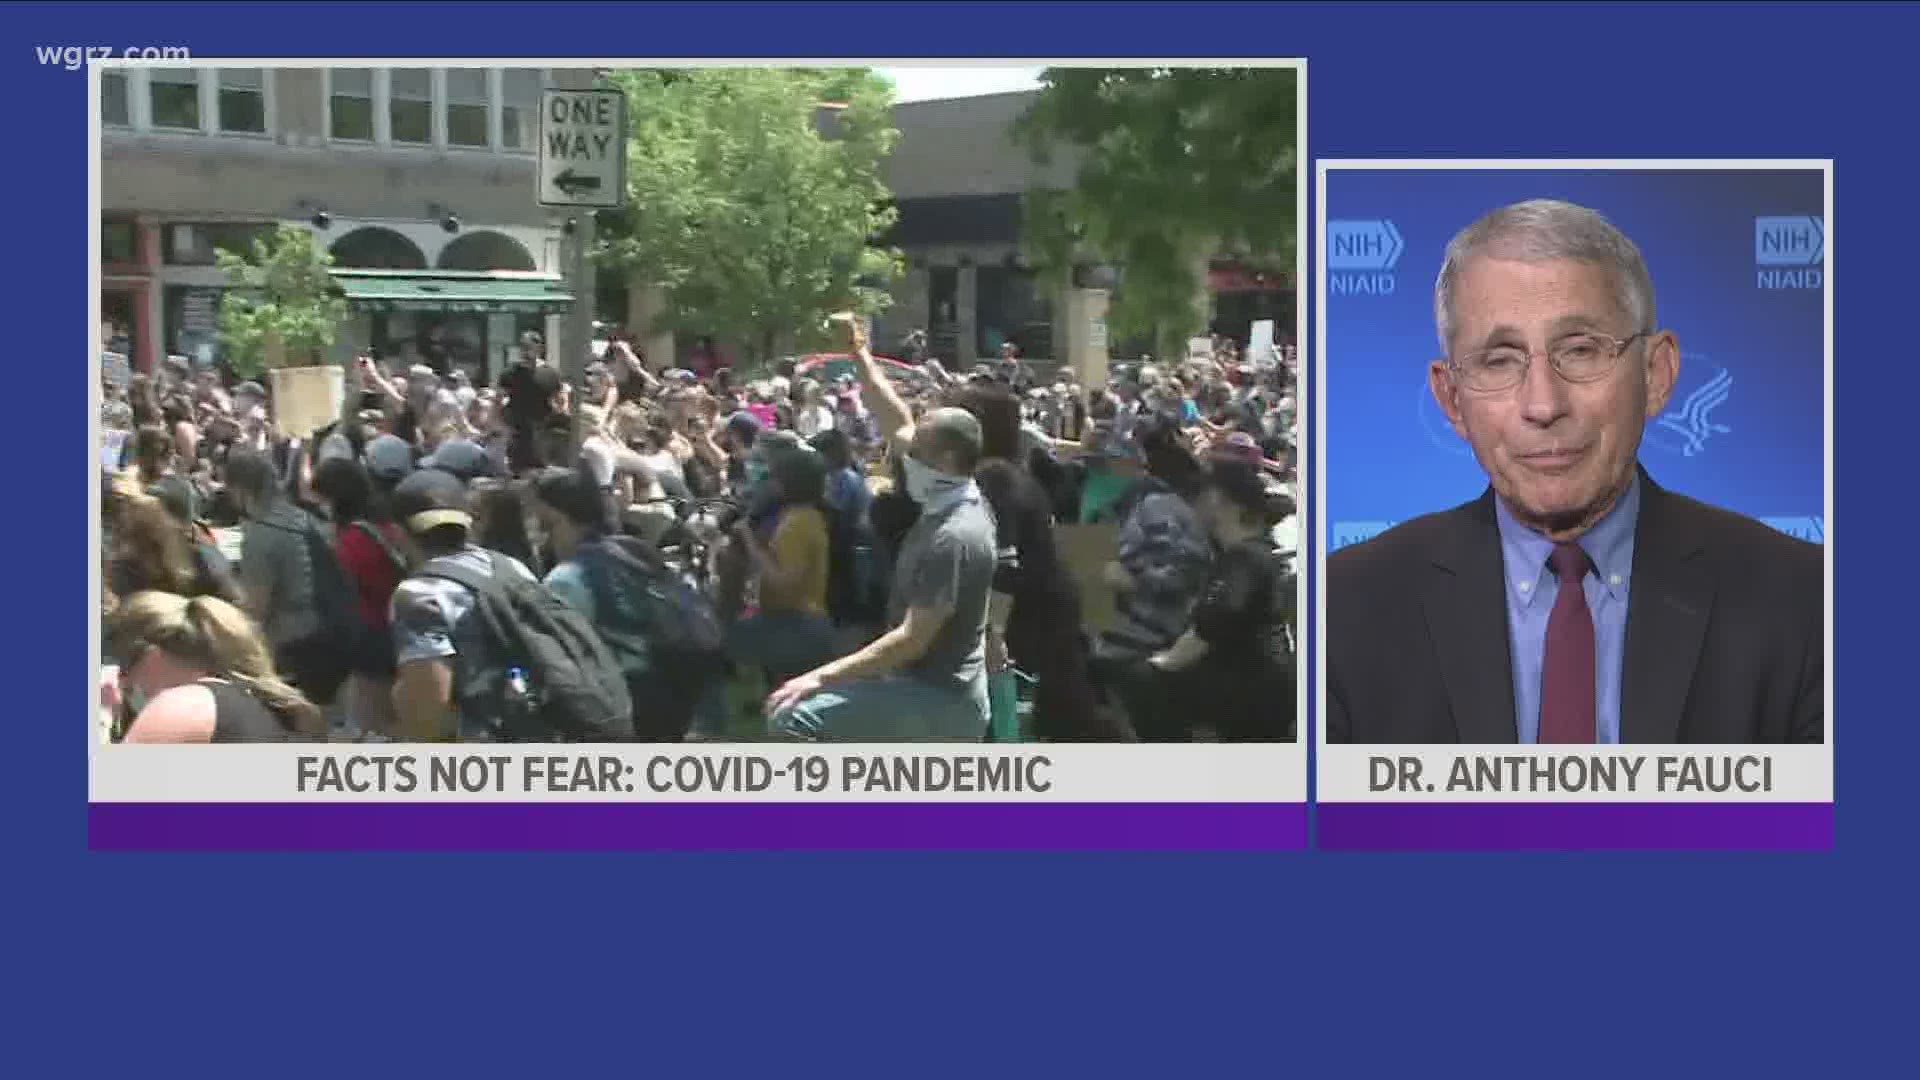 Our Pete Gallivan spoke one-on-one today
with Doctor Anthony Fauci on a number of topics - from Covid-19 and the recent protests to what he believes will happen next